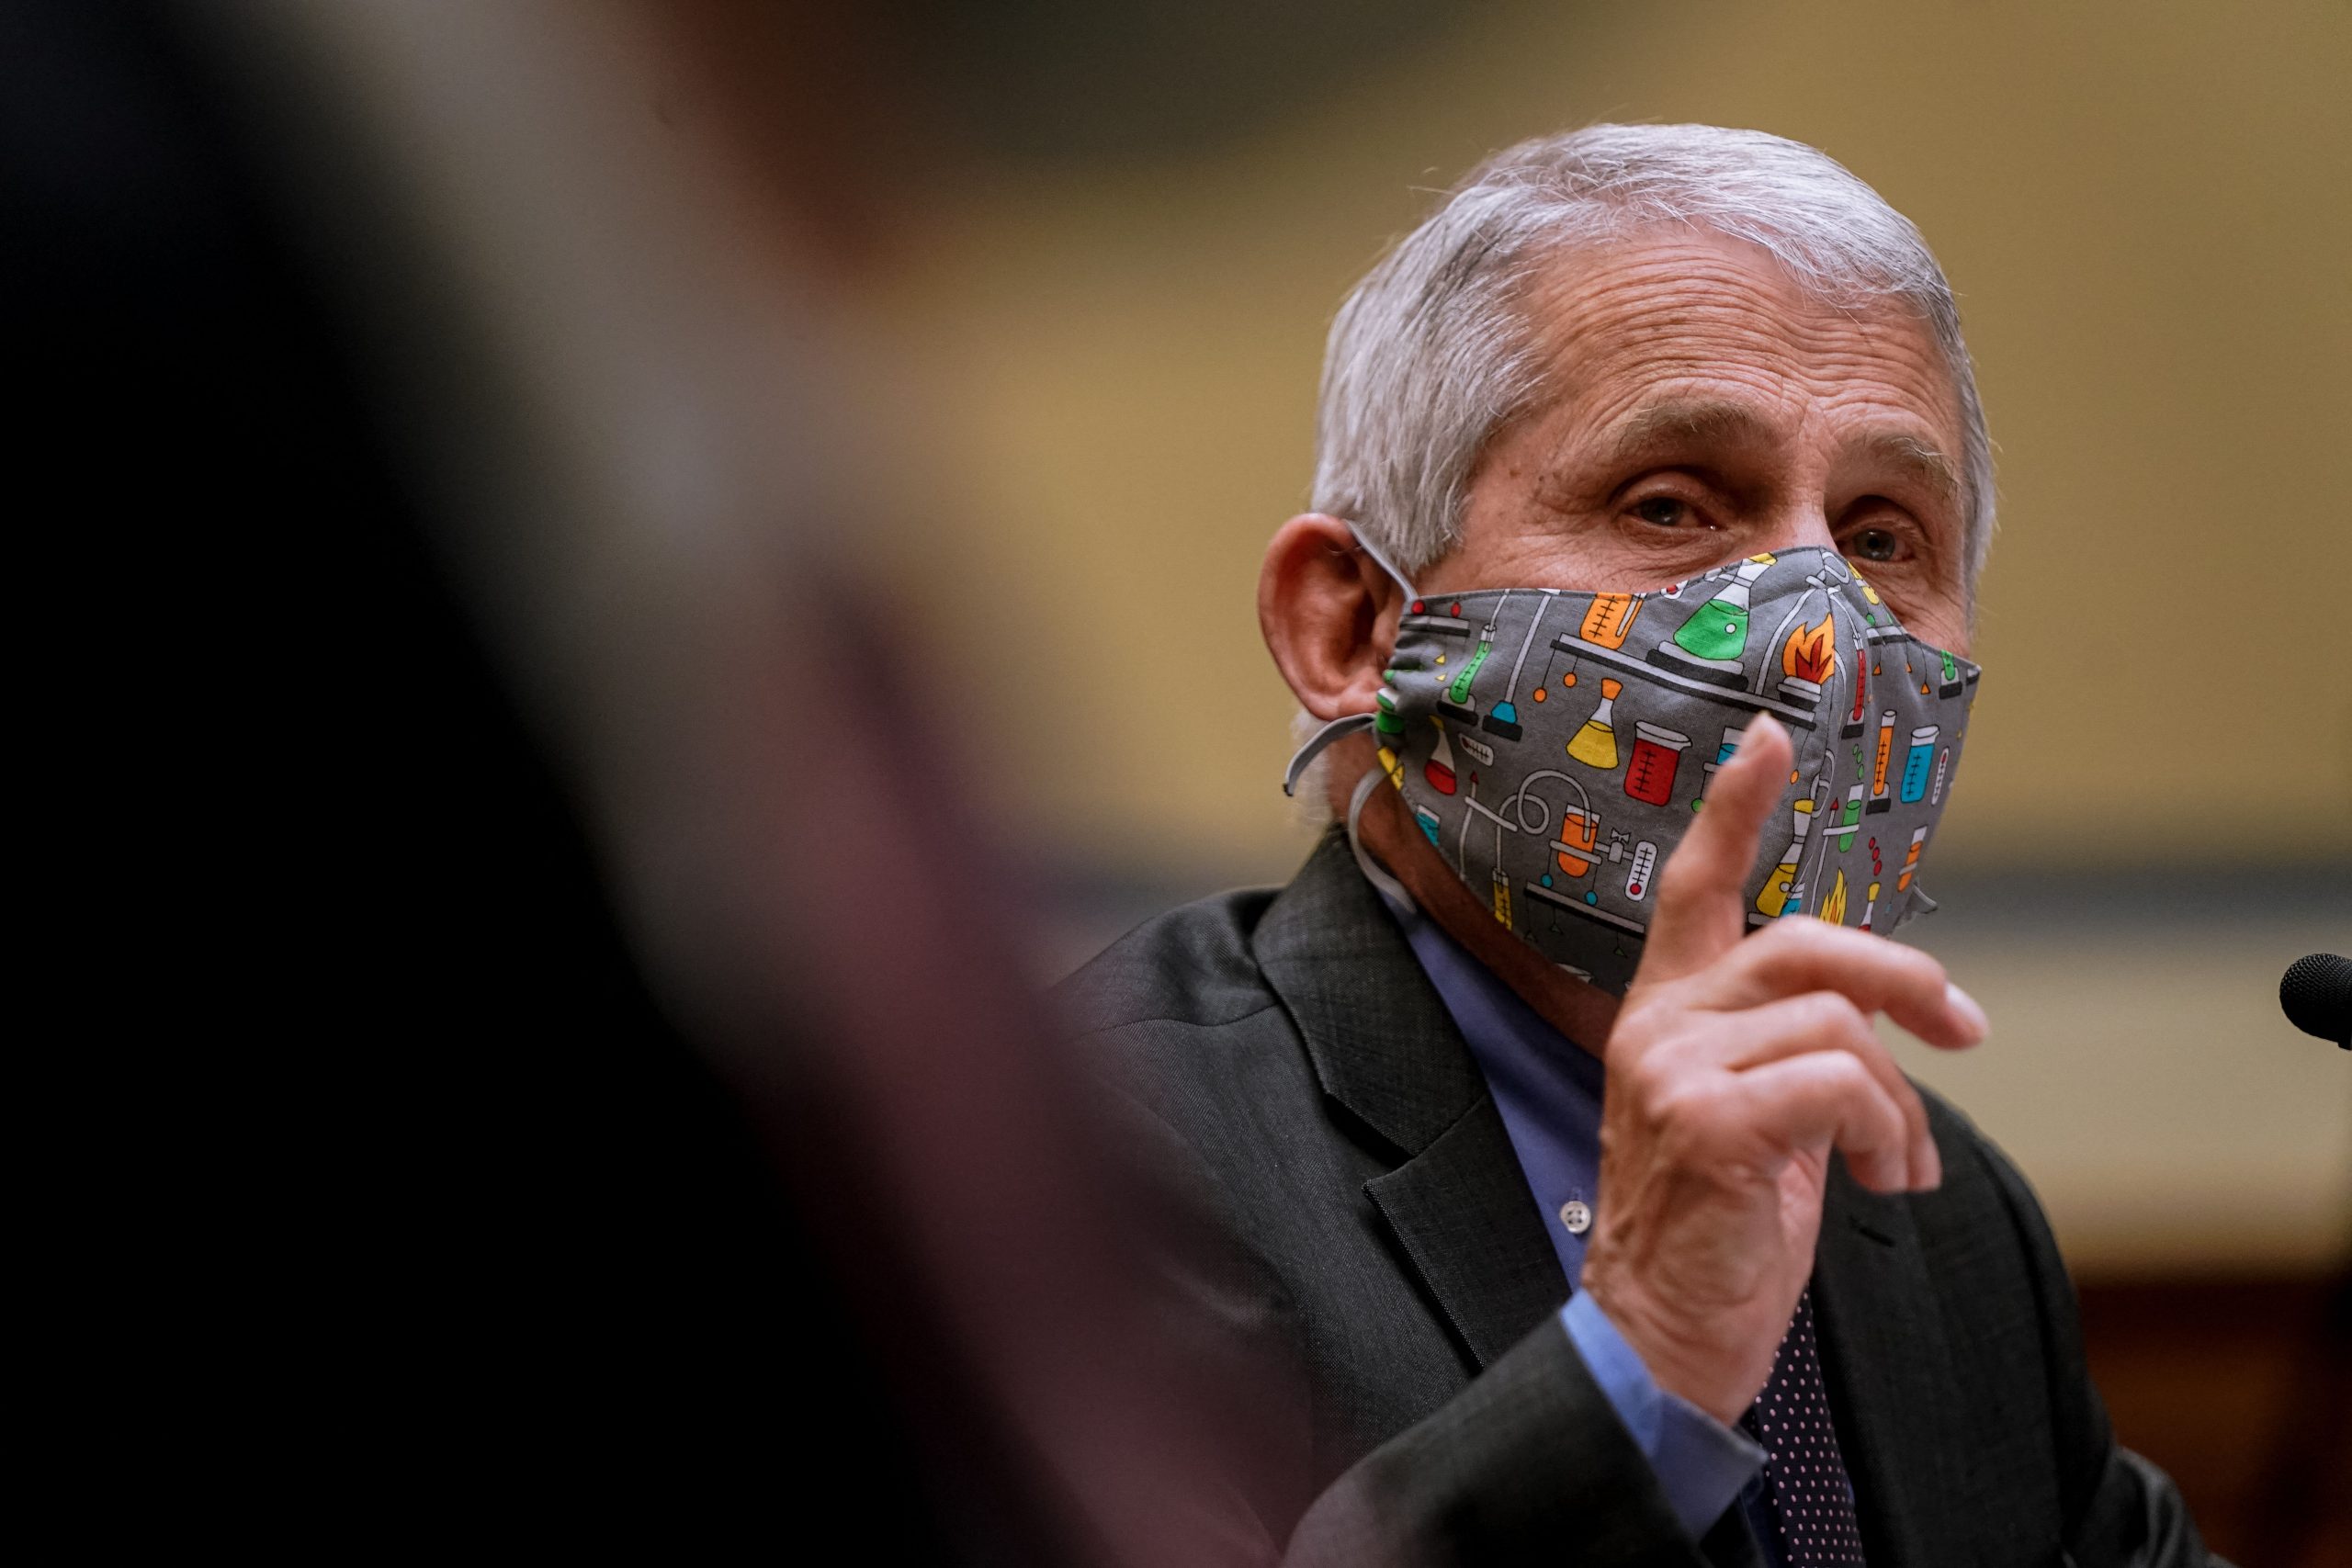 Low vaccinated US areas will see COVID surge due to Delta variant: Anthony Fauci